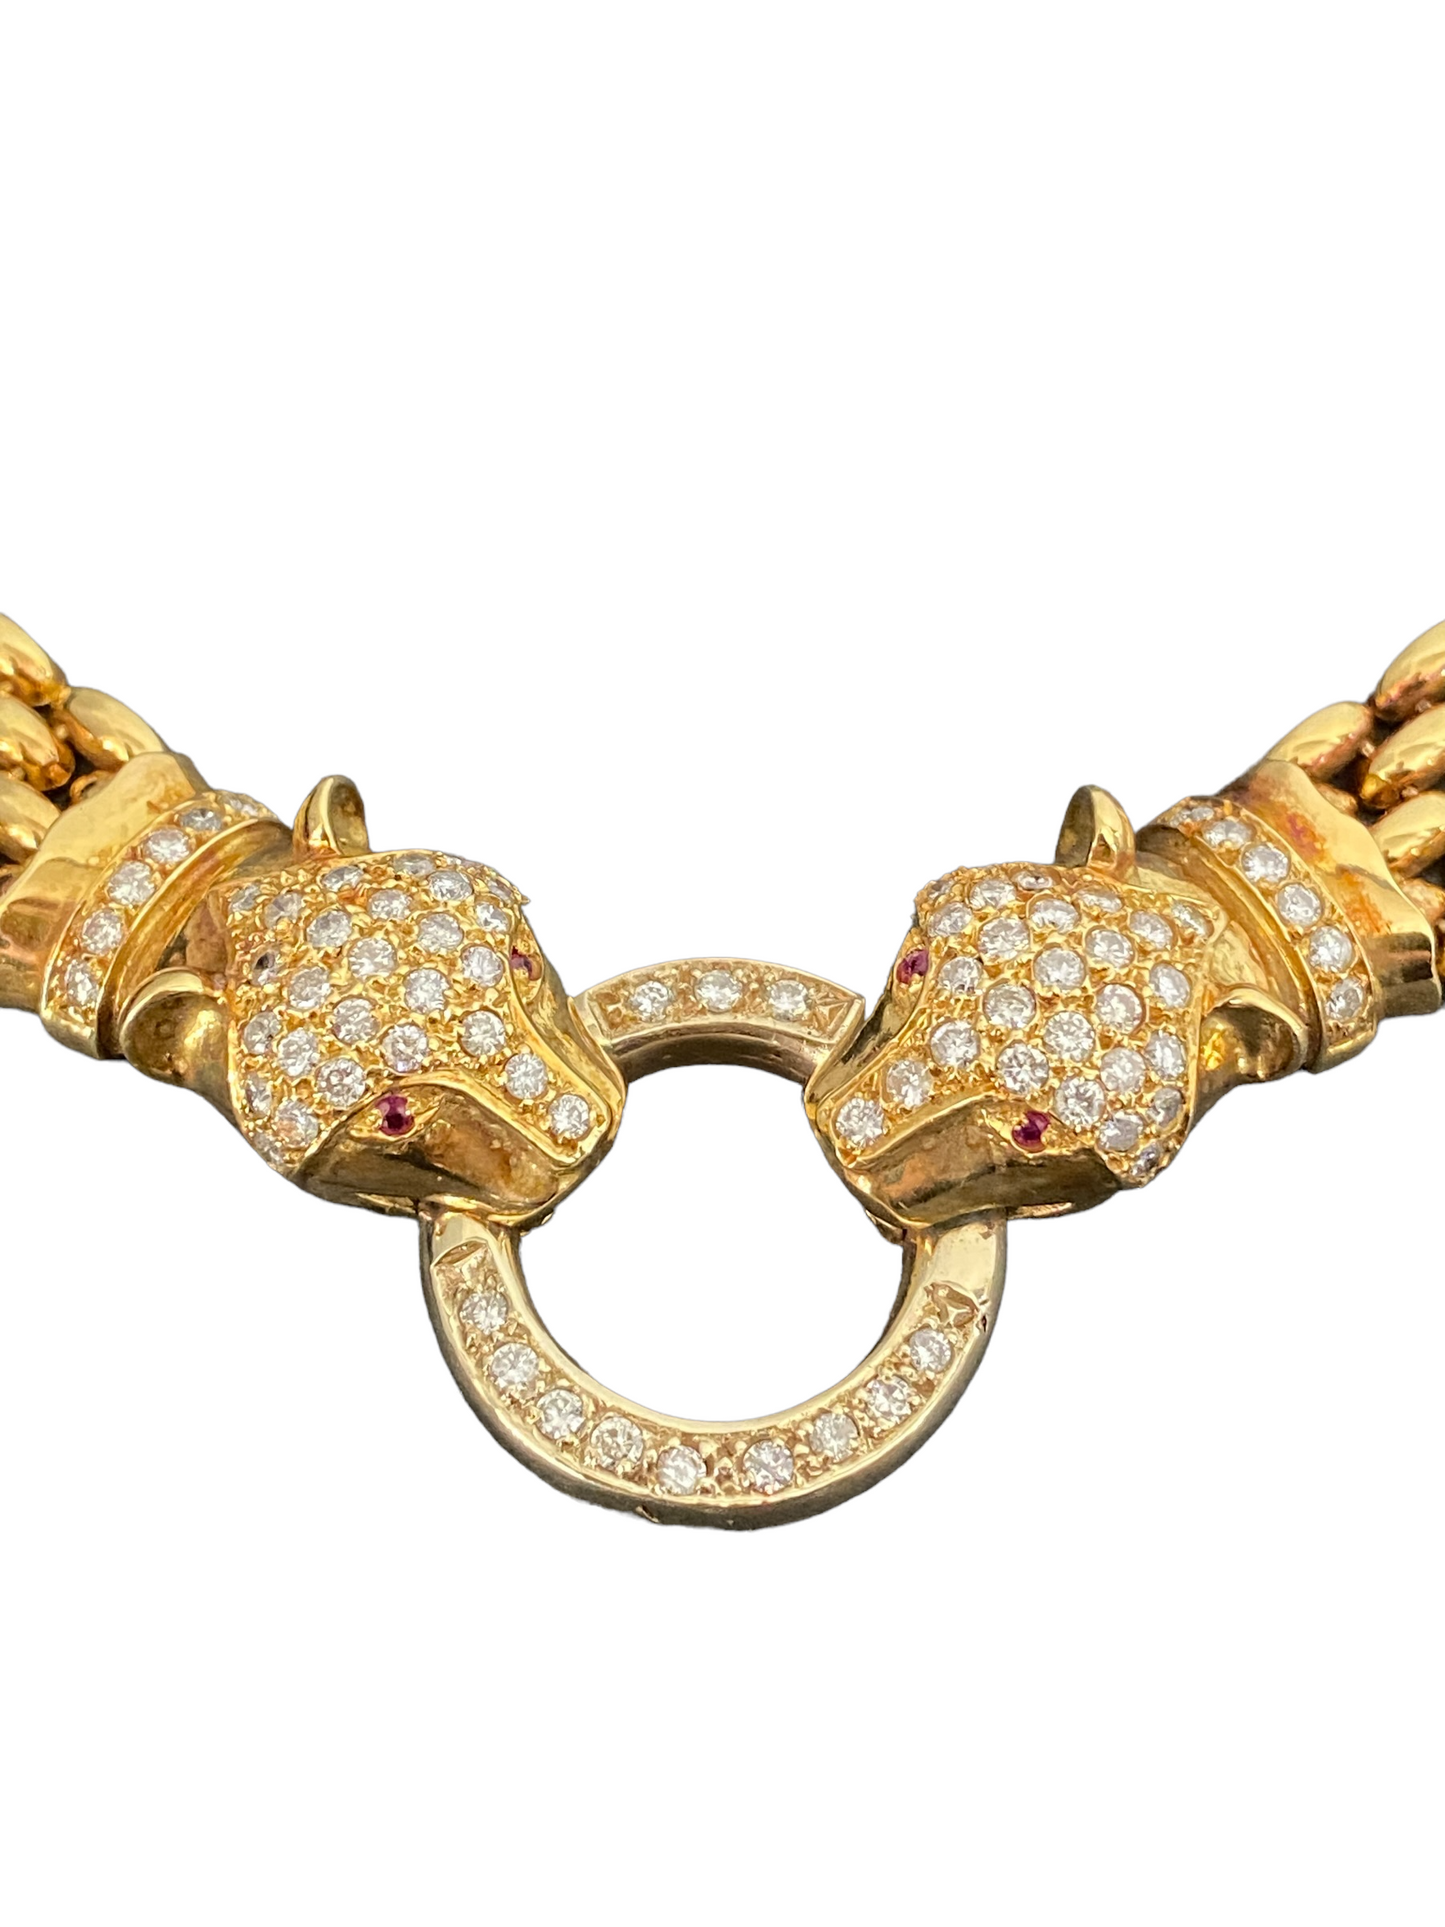 #1954 18KT  Gold / Diamond Panther Head Necklace